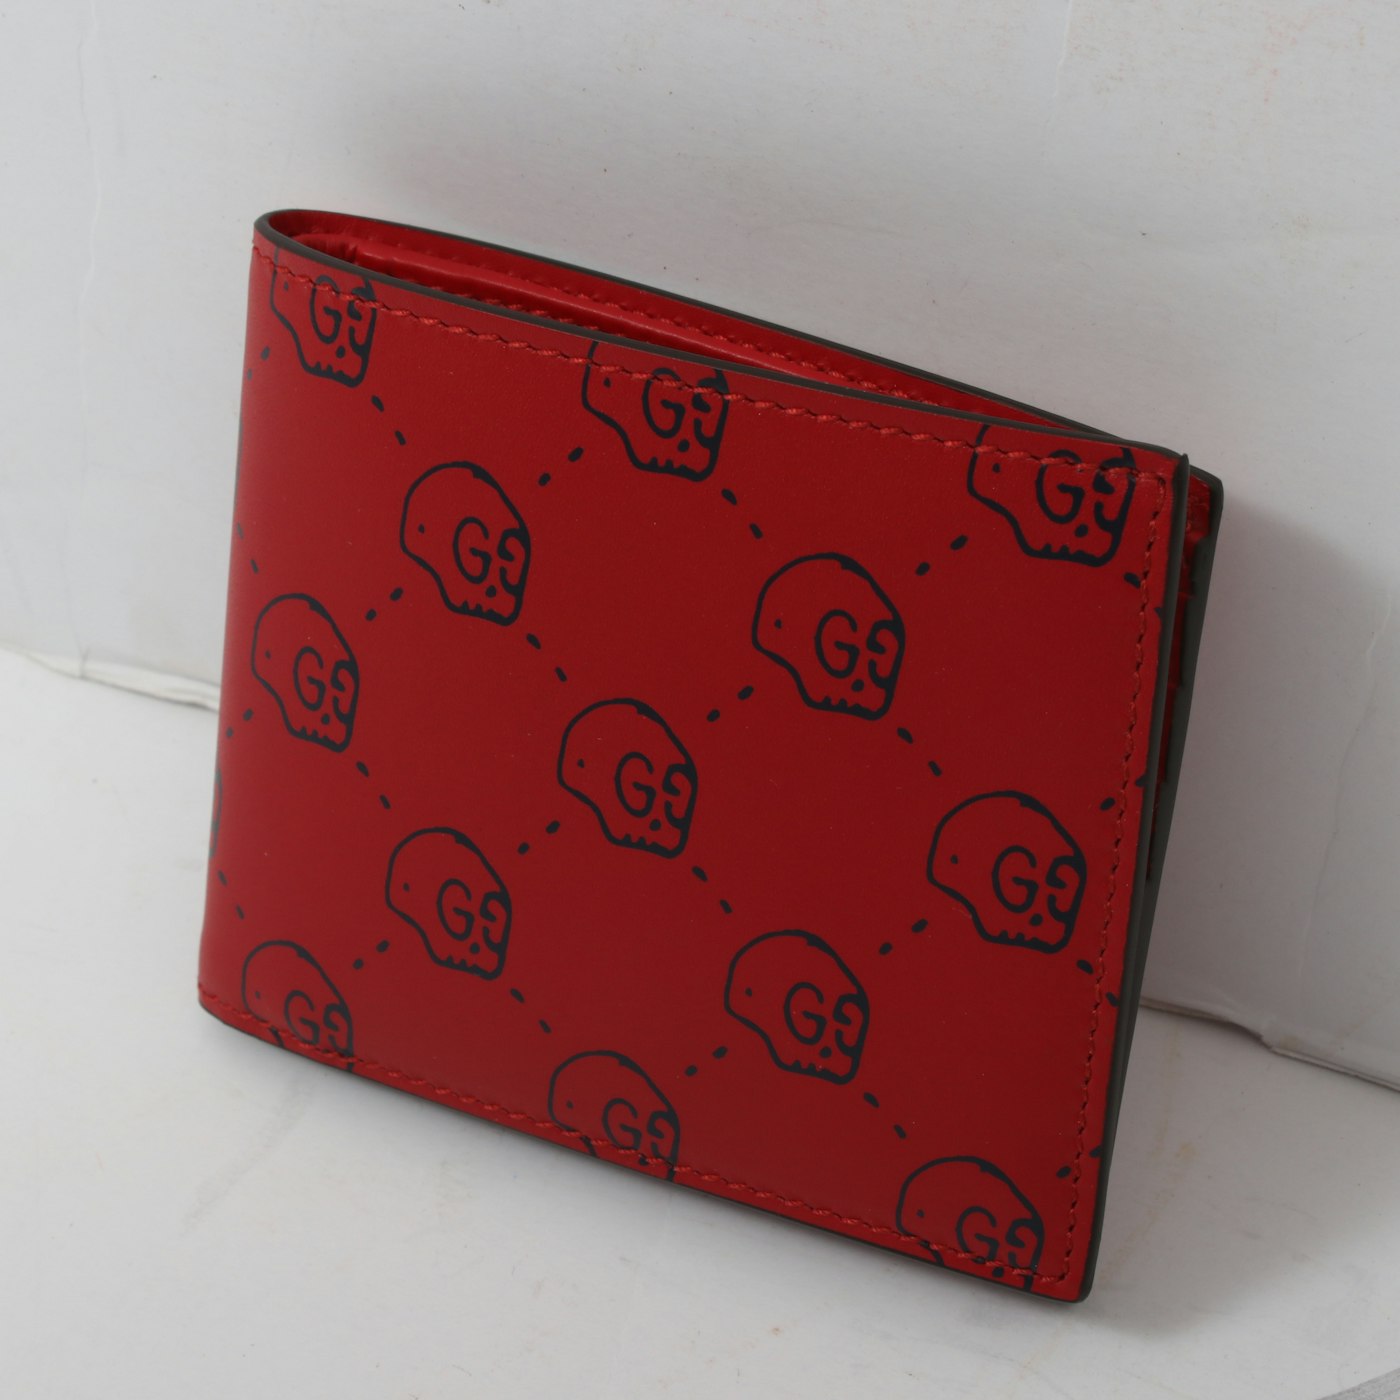 Gucci Ghost Skull Leather Wallet in Red | EBTH